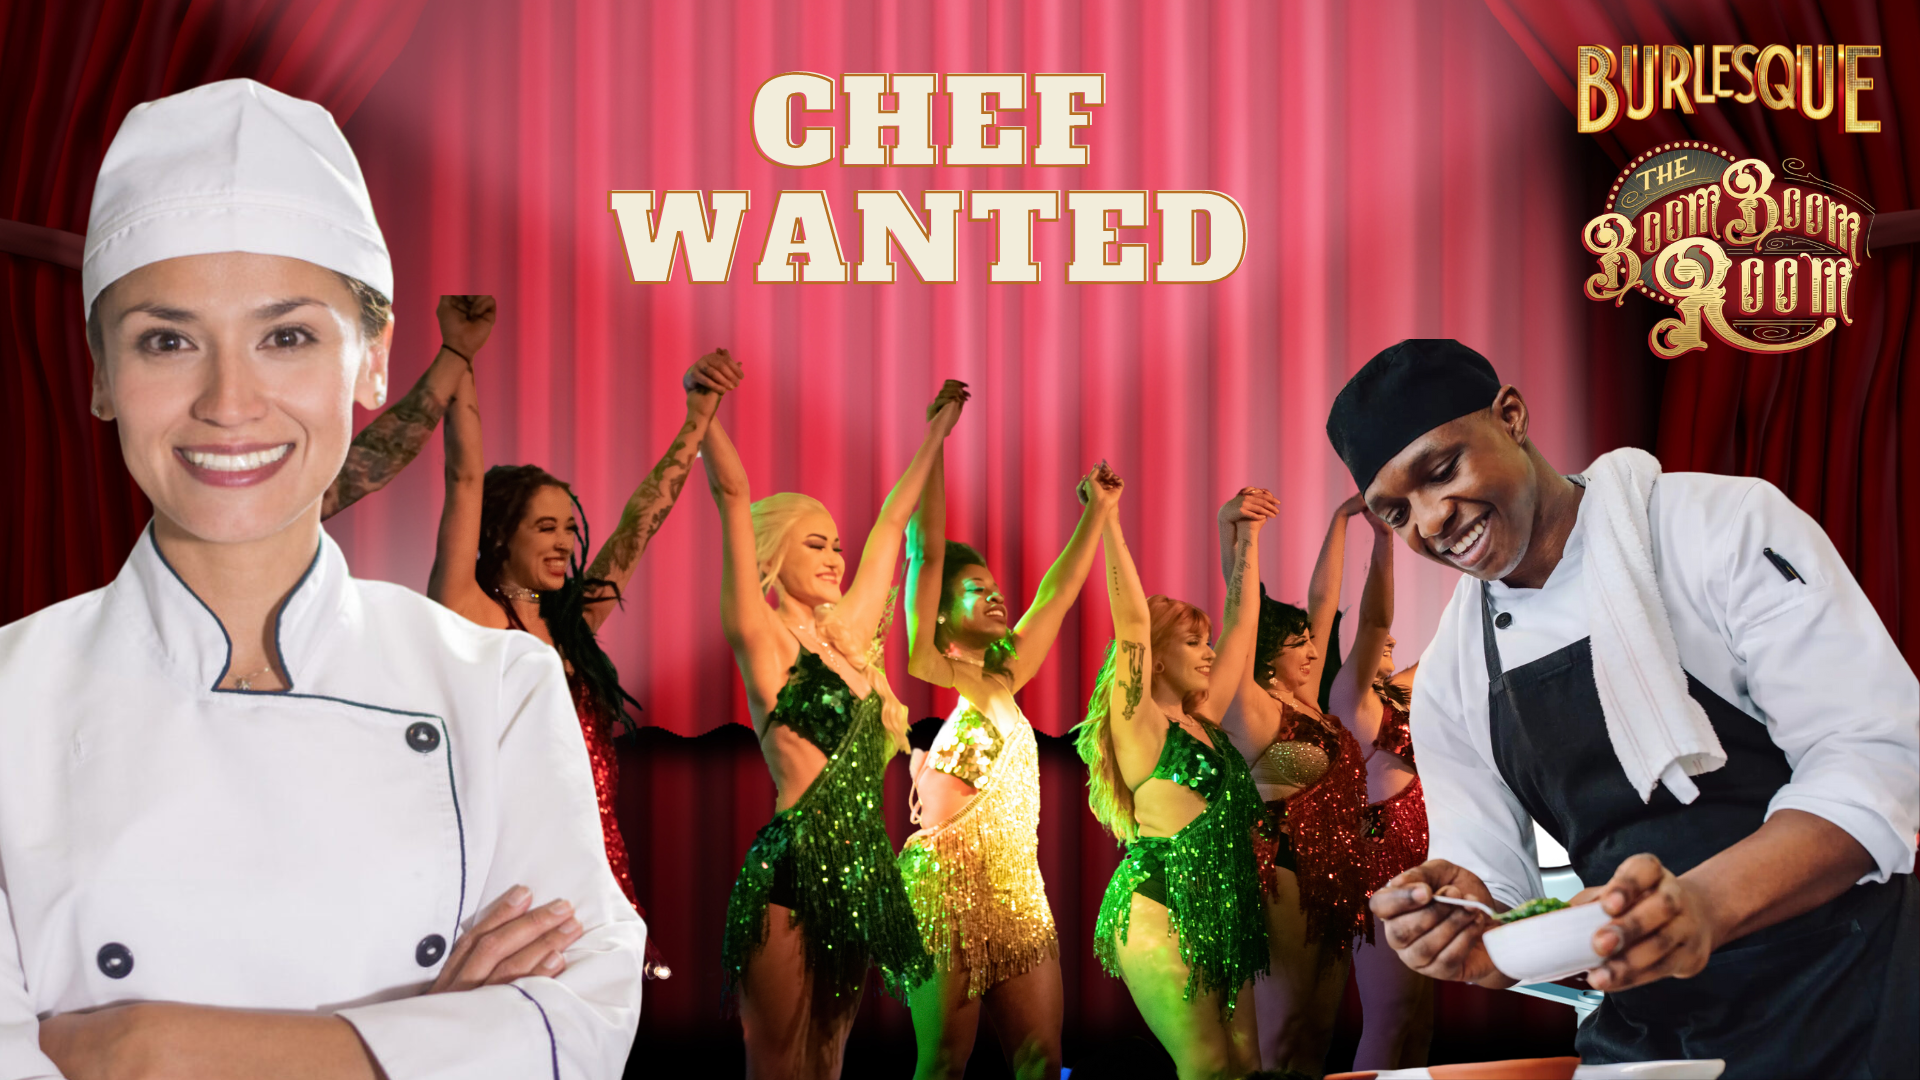 chef wanted.png (Copy)